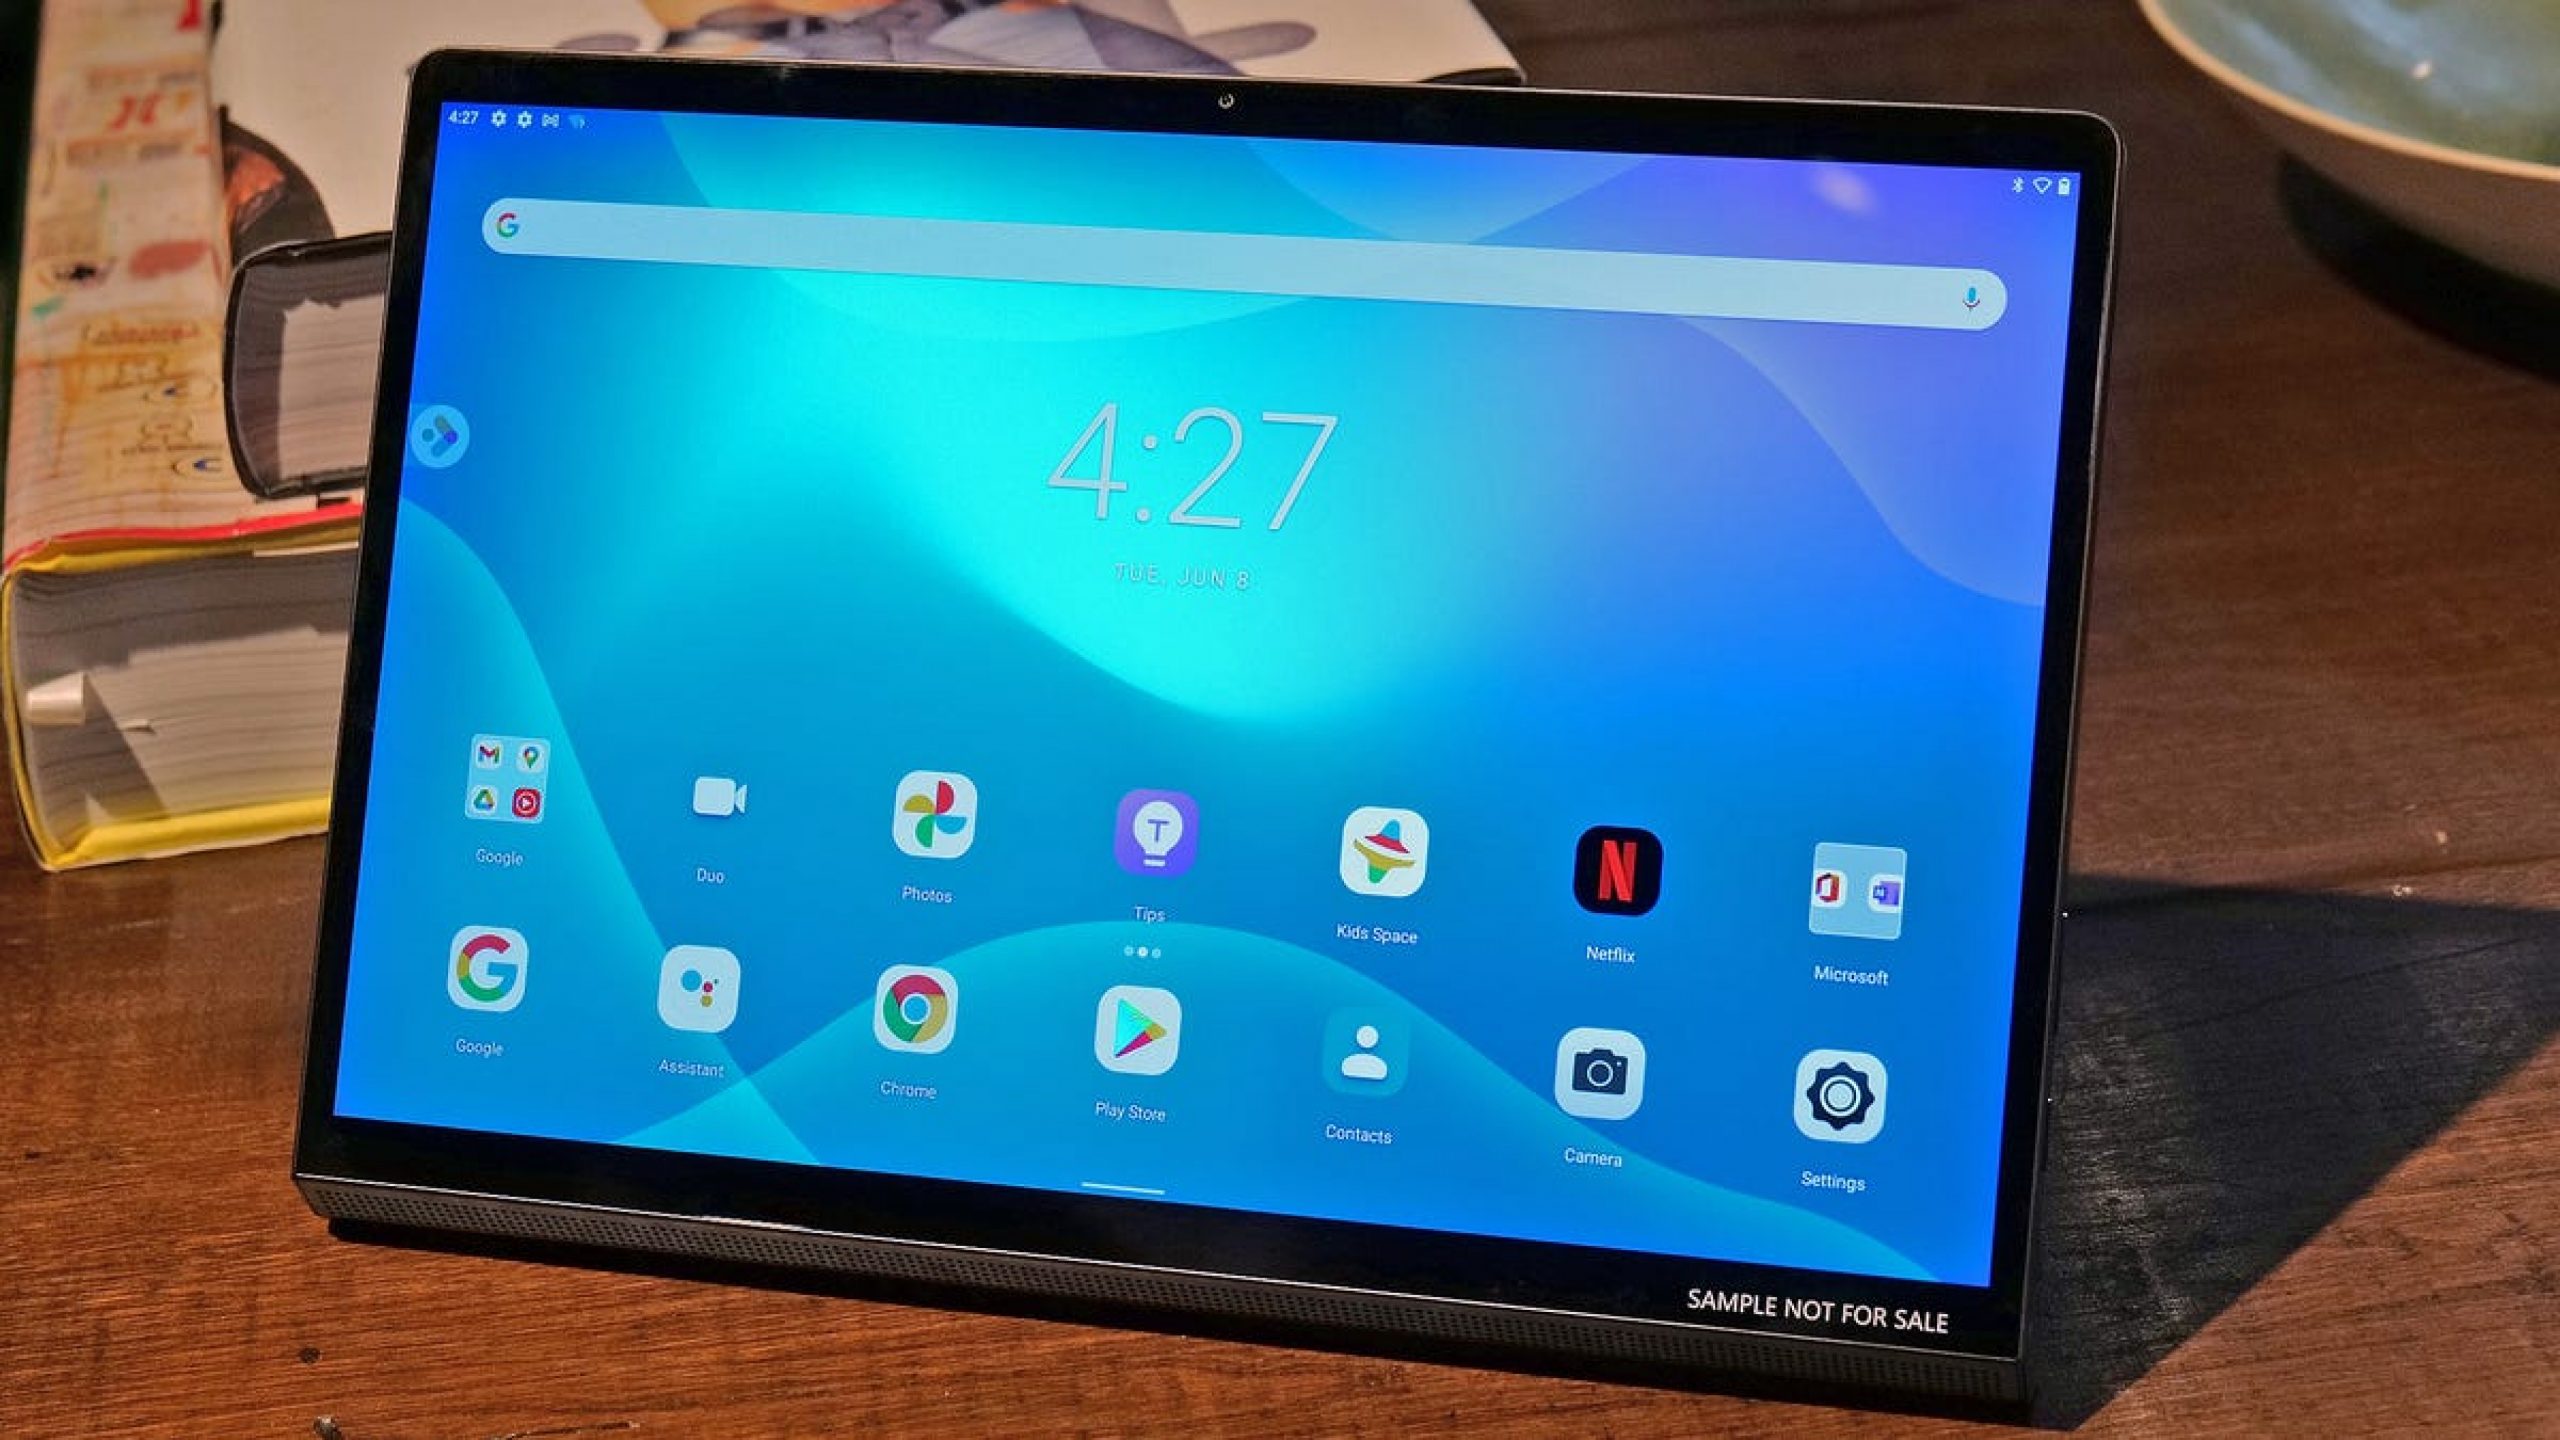 Lenovo Reveals an Android Tablet That Doubles as a Portable Monitor